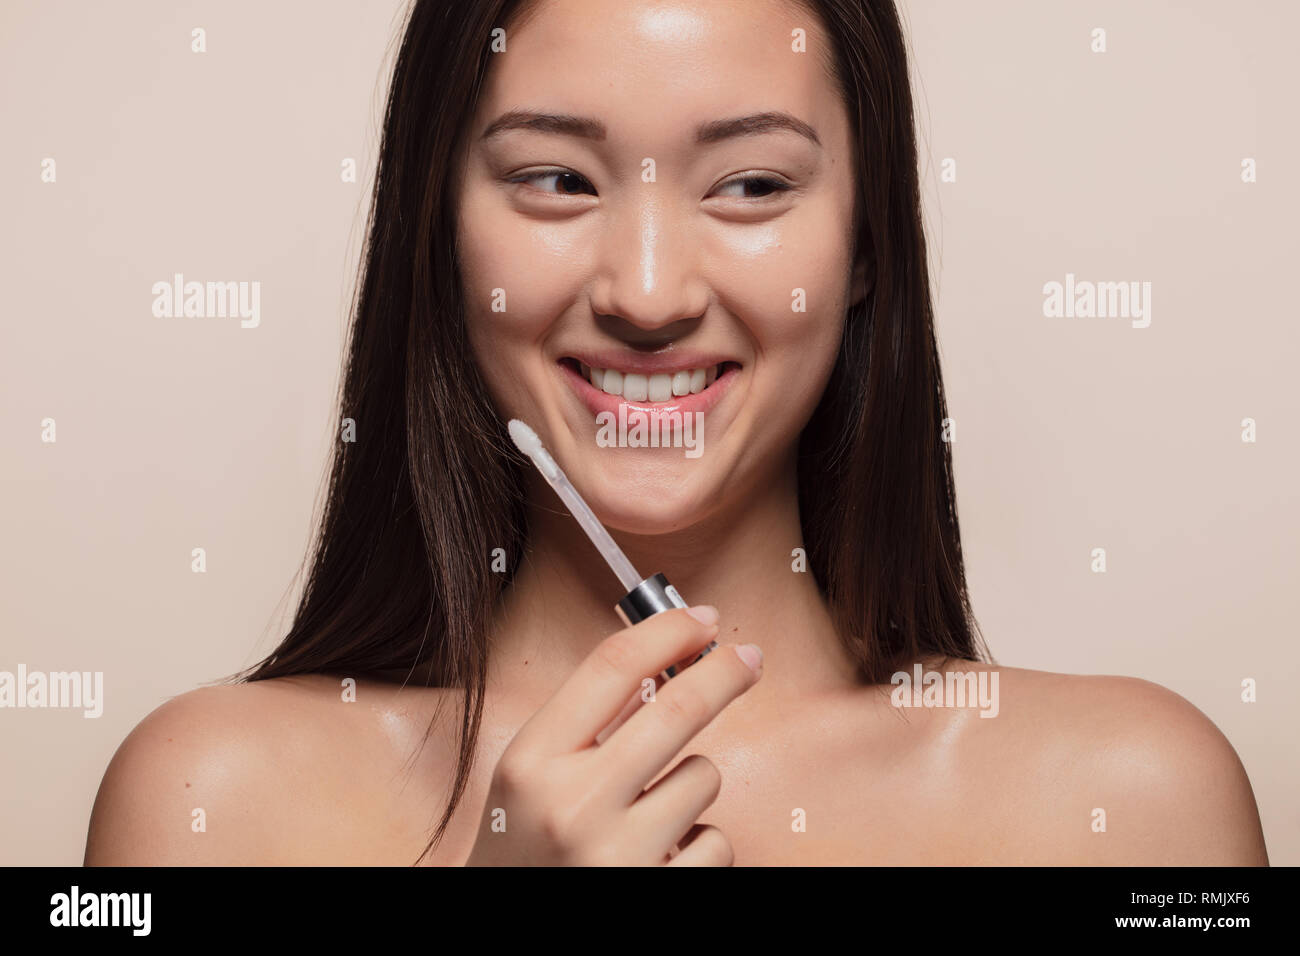 Close up of smiling young woman doing make up. Korean female model with make up applicator looking away and smiling. Stock Photo